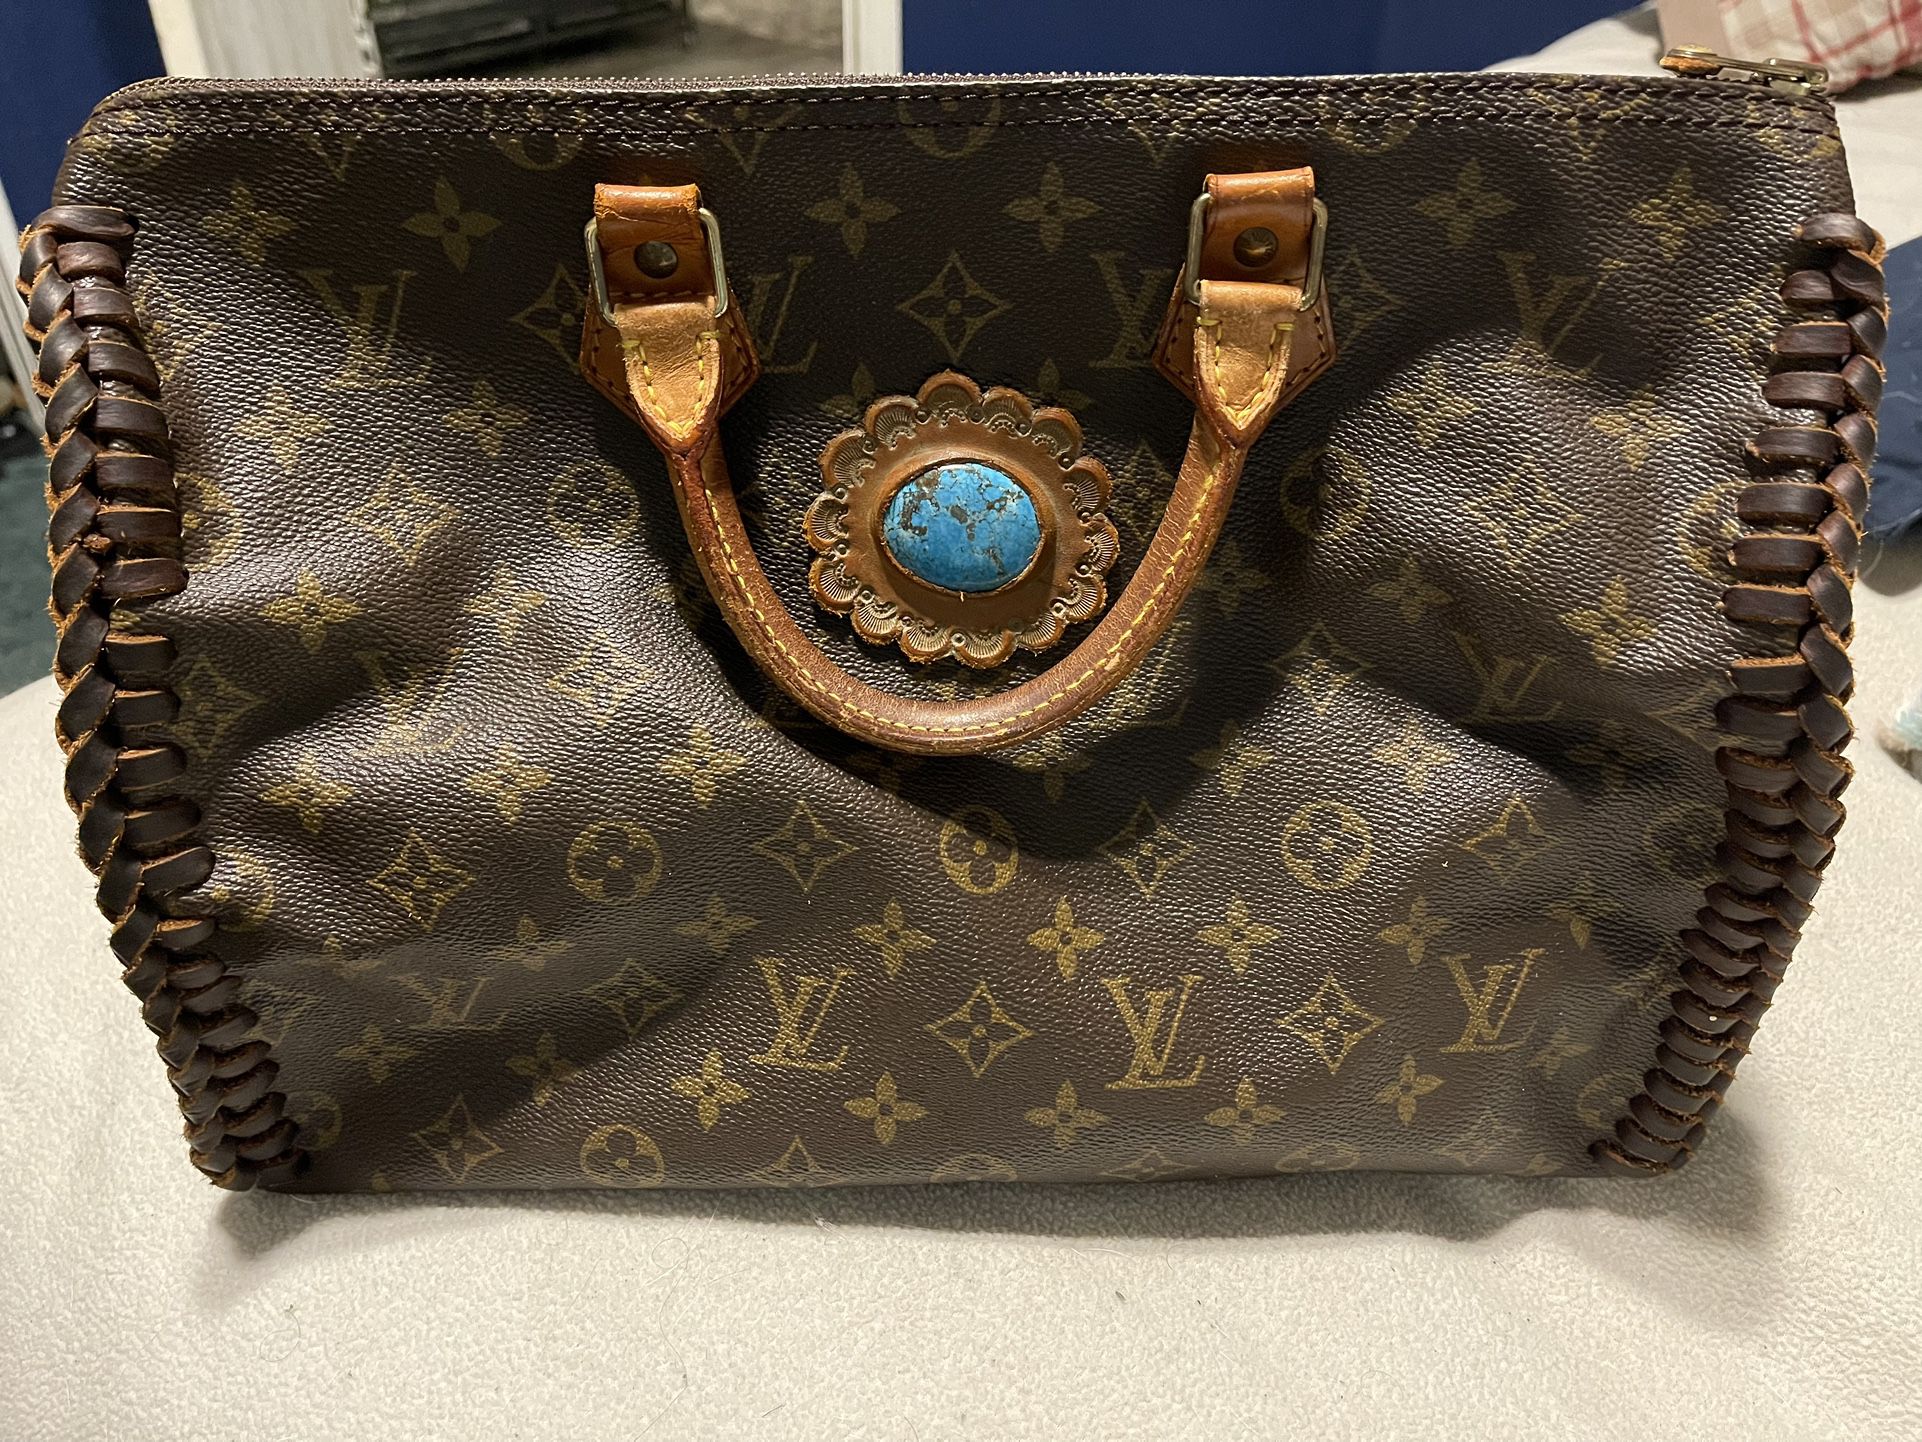 Up cycled Authentic Louis Vuitton bag